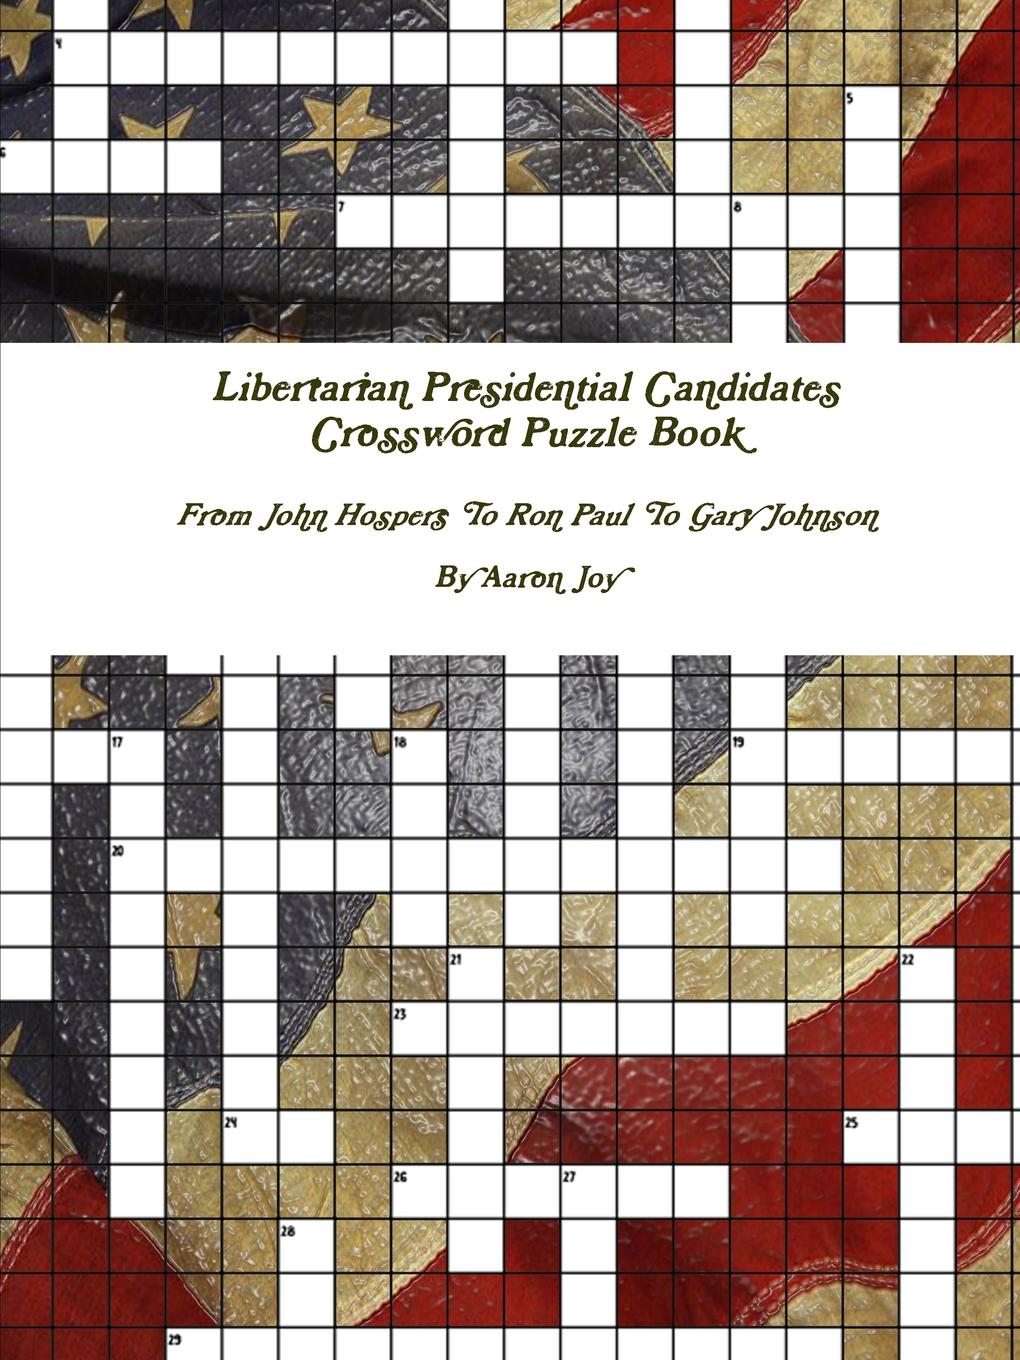 Libertarian Presidential Candidates Crossword Puzzle Book. From John Hospers To Ron Paul To Gary Johnson